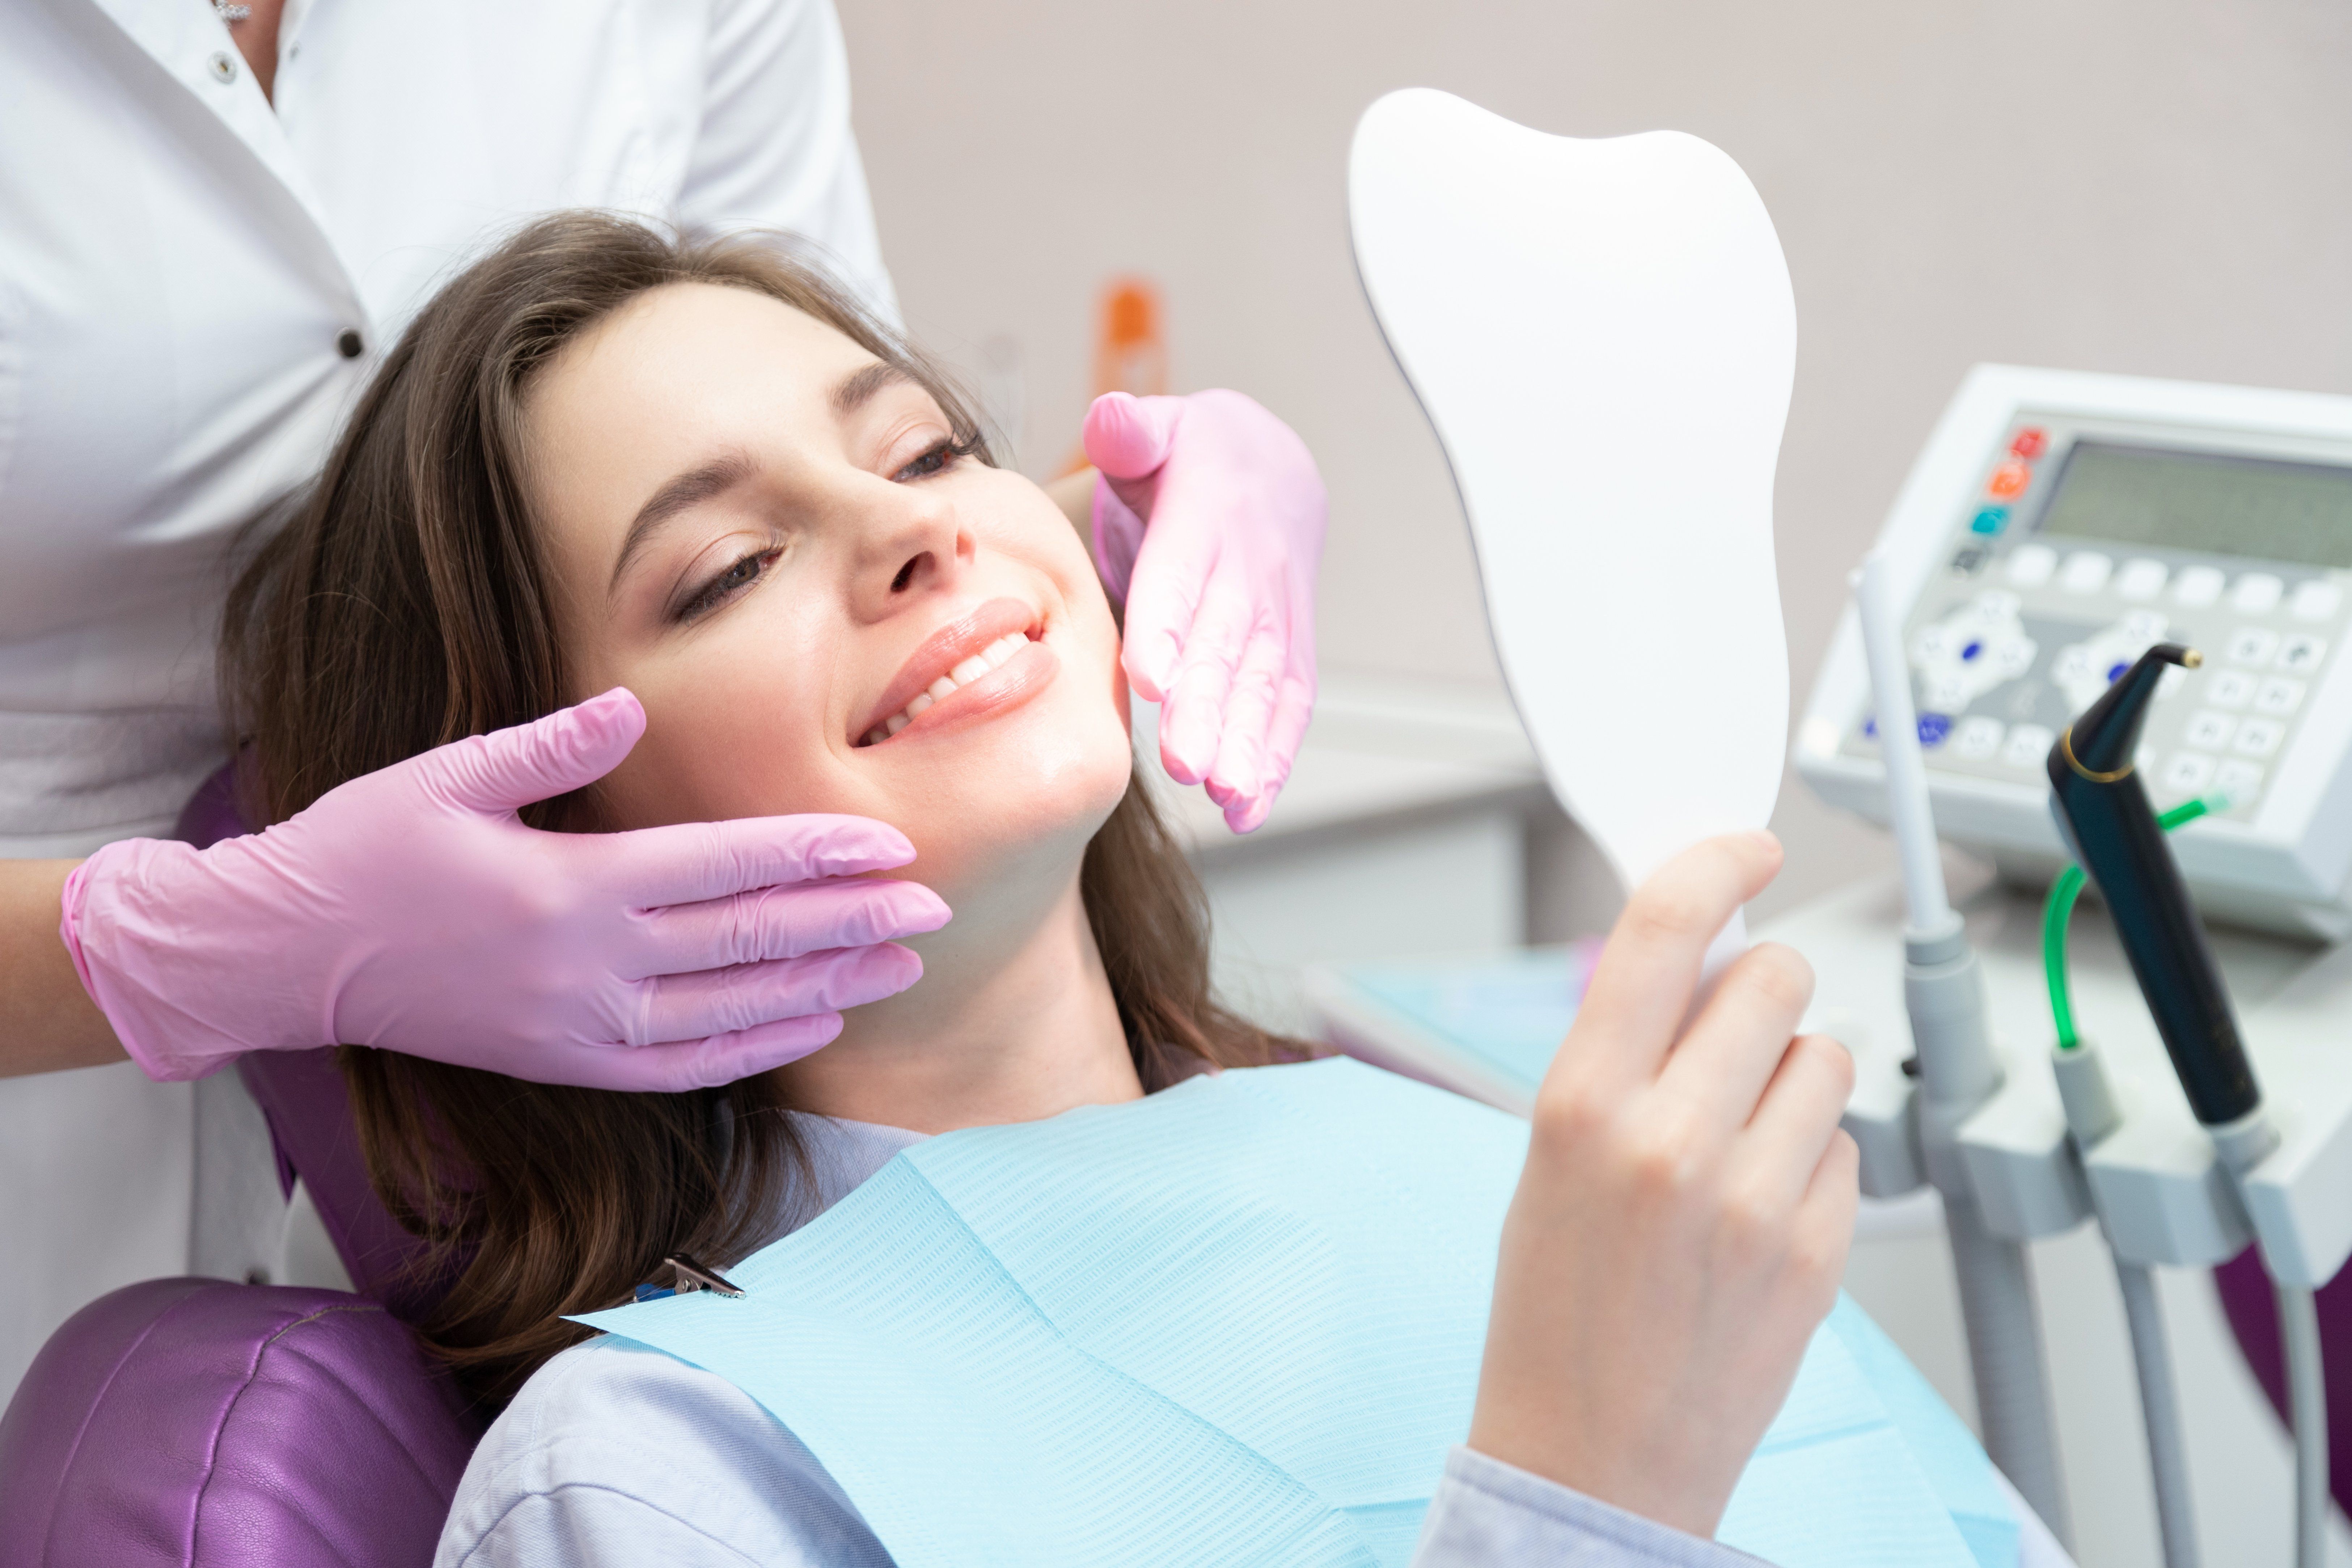 What Treatments Does a Smile Makeover Include?